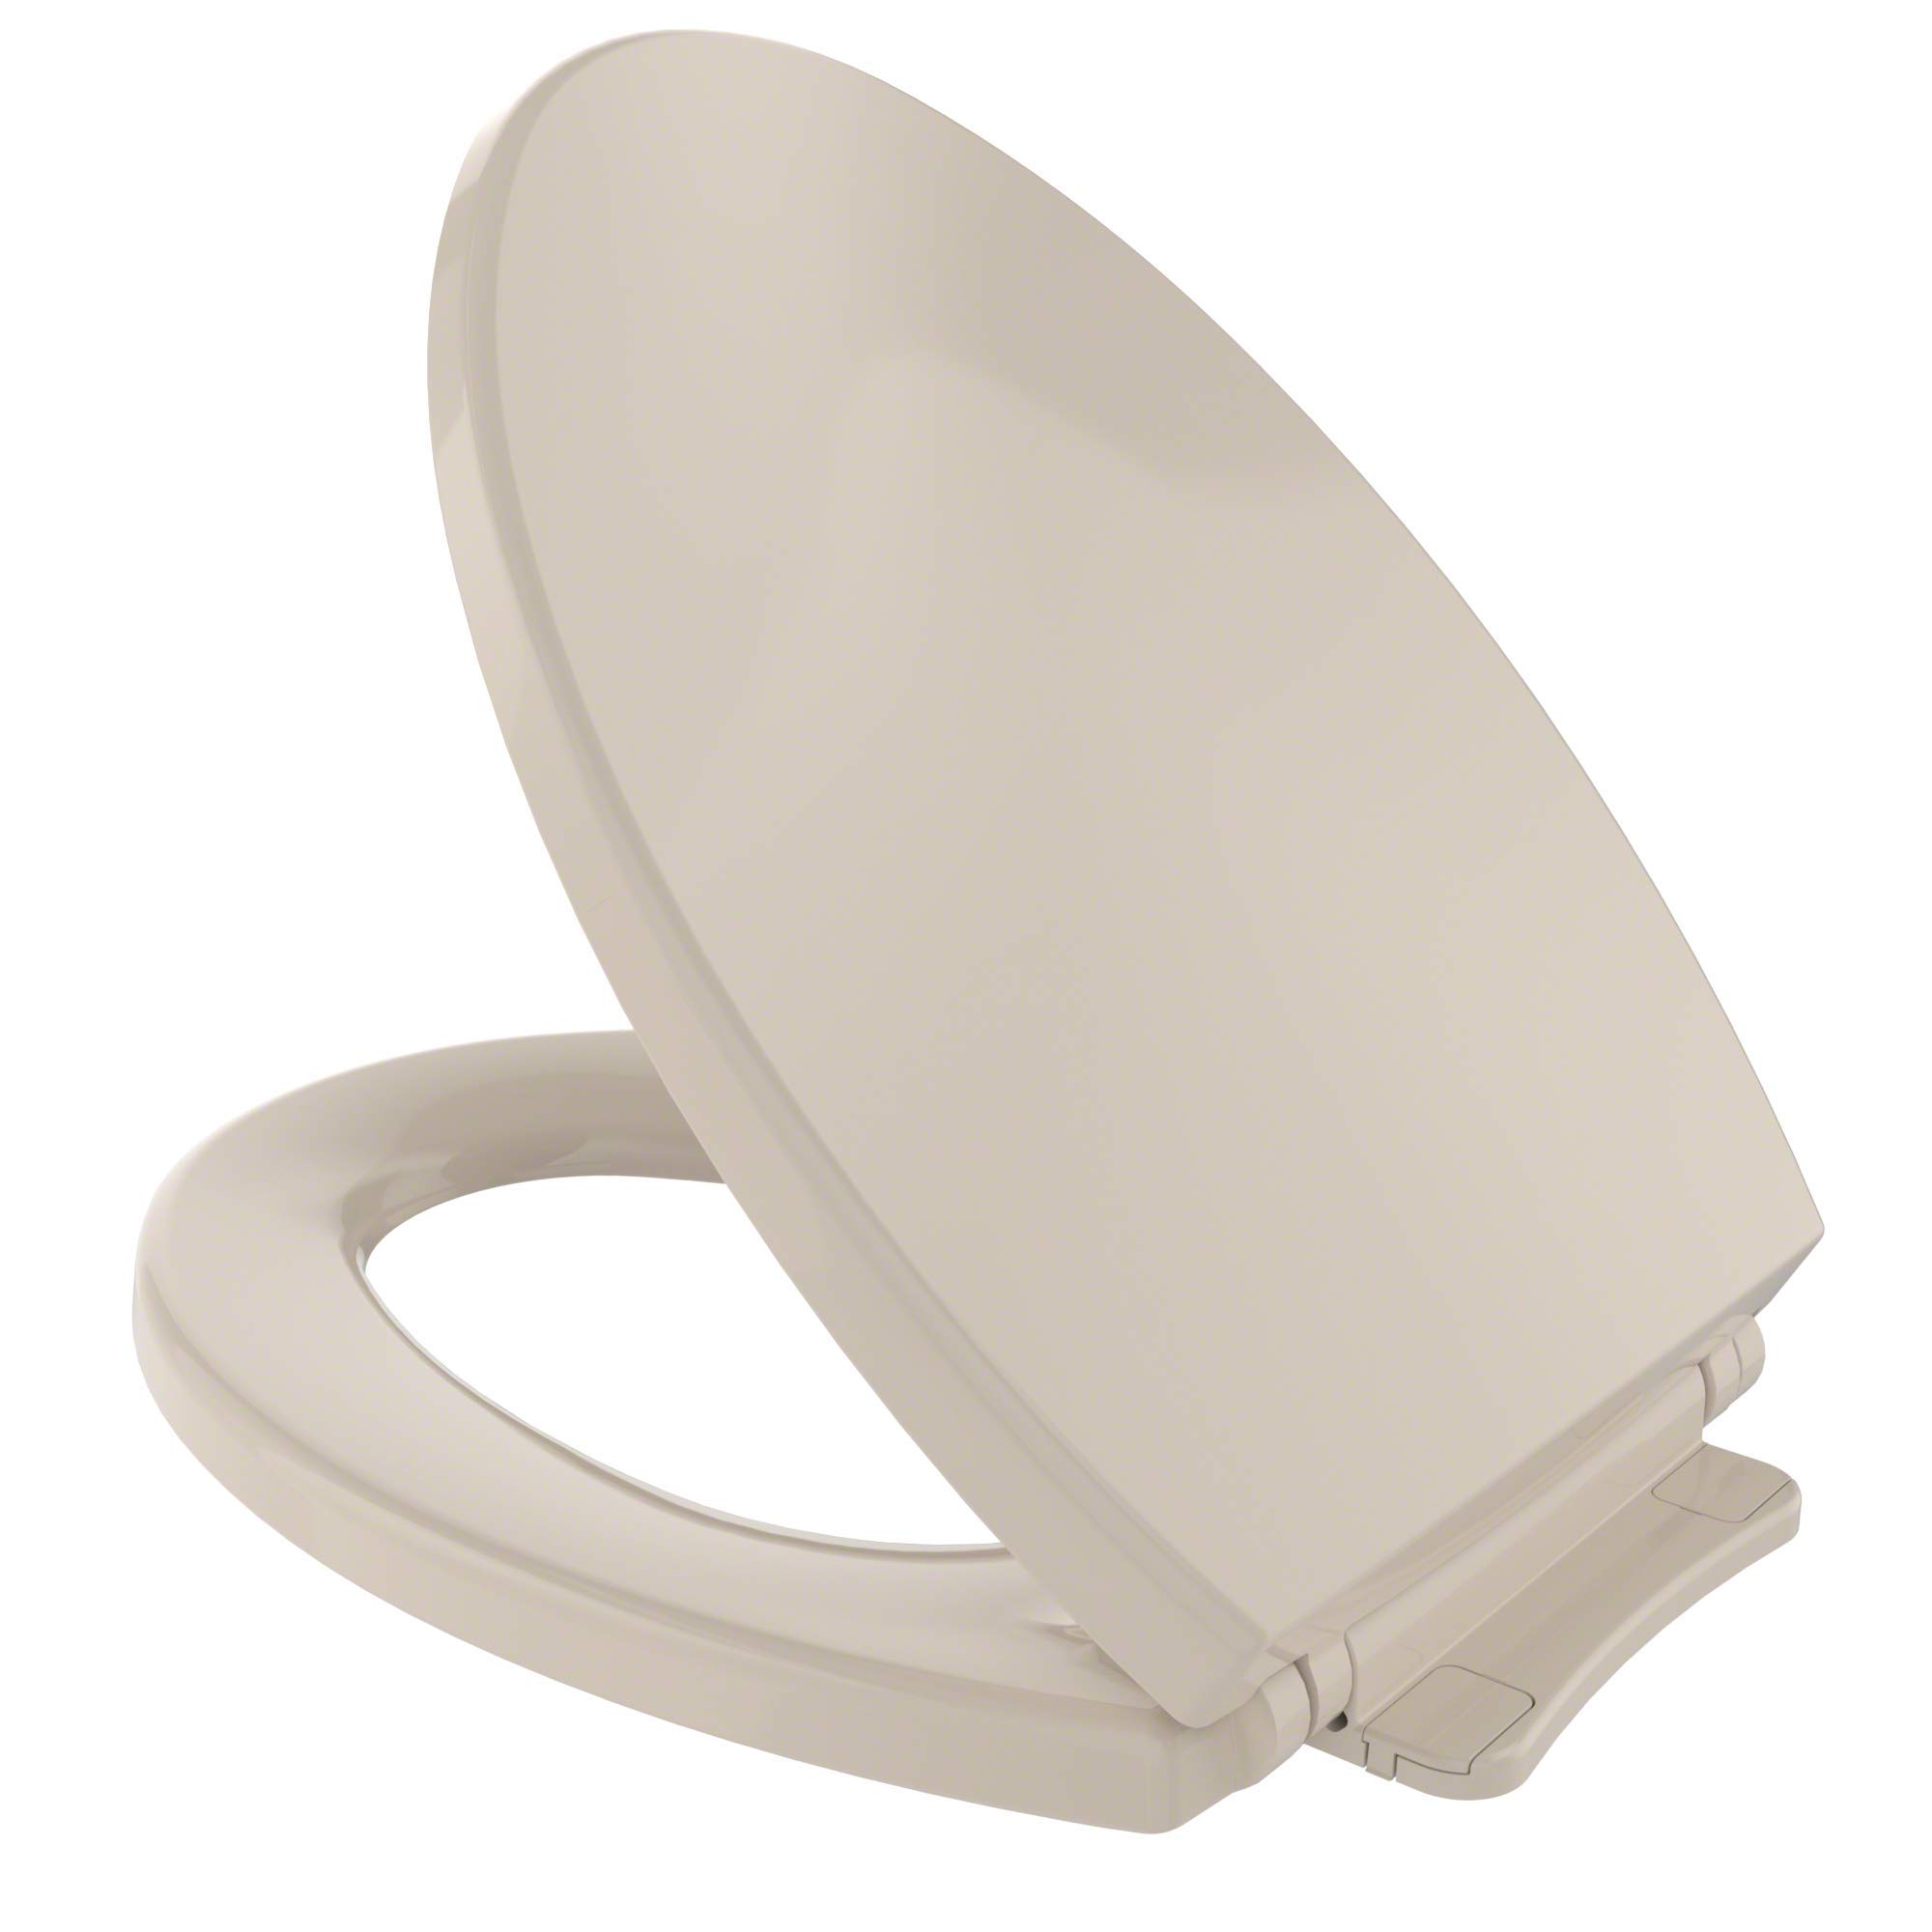 Toto Transitional SoftClose Toilet Seat